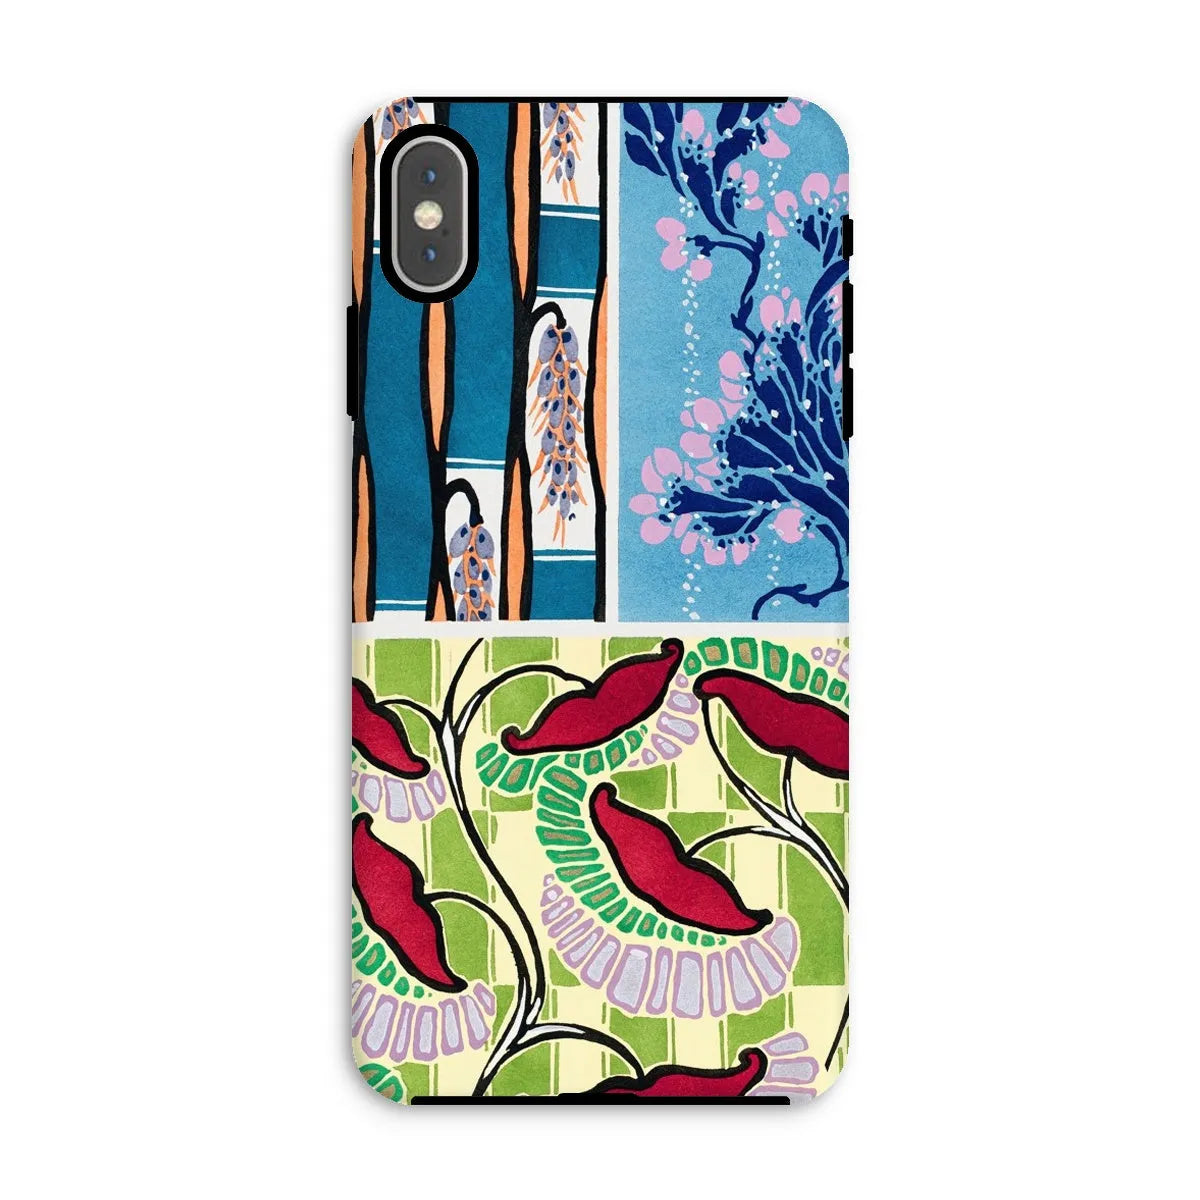 Floral Kitsch Aesthetic Art Phone Case - E.a. Séguy - Iphone Xs Max / Matte - Mobile Phone Cases - Aesthetic Art